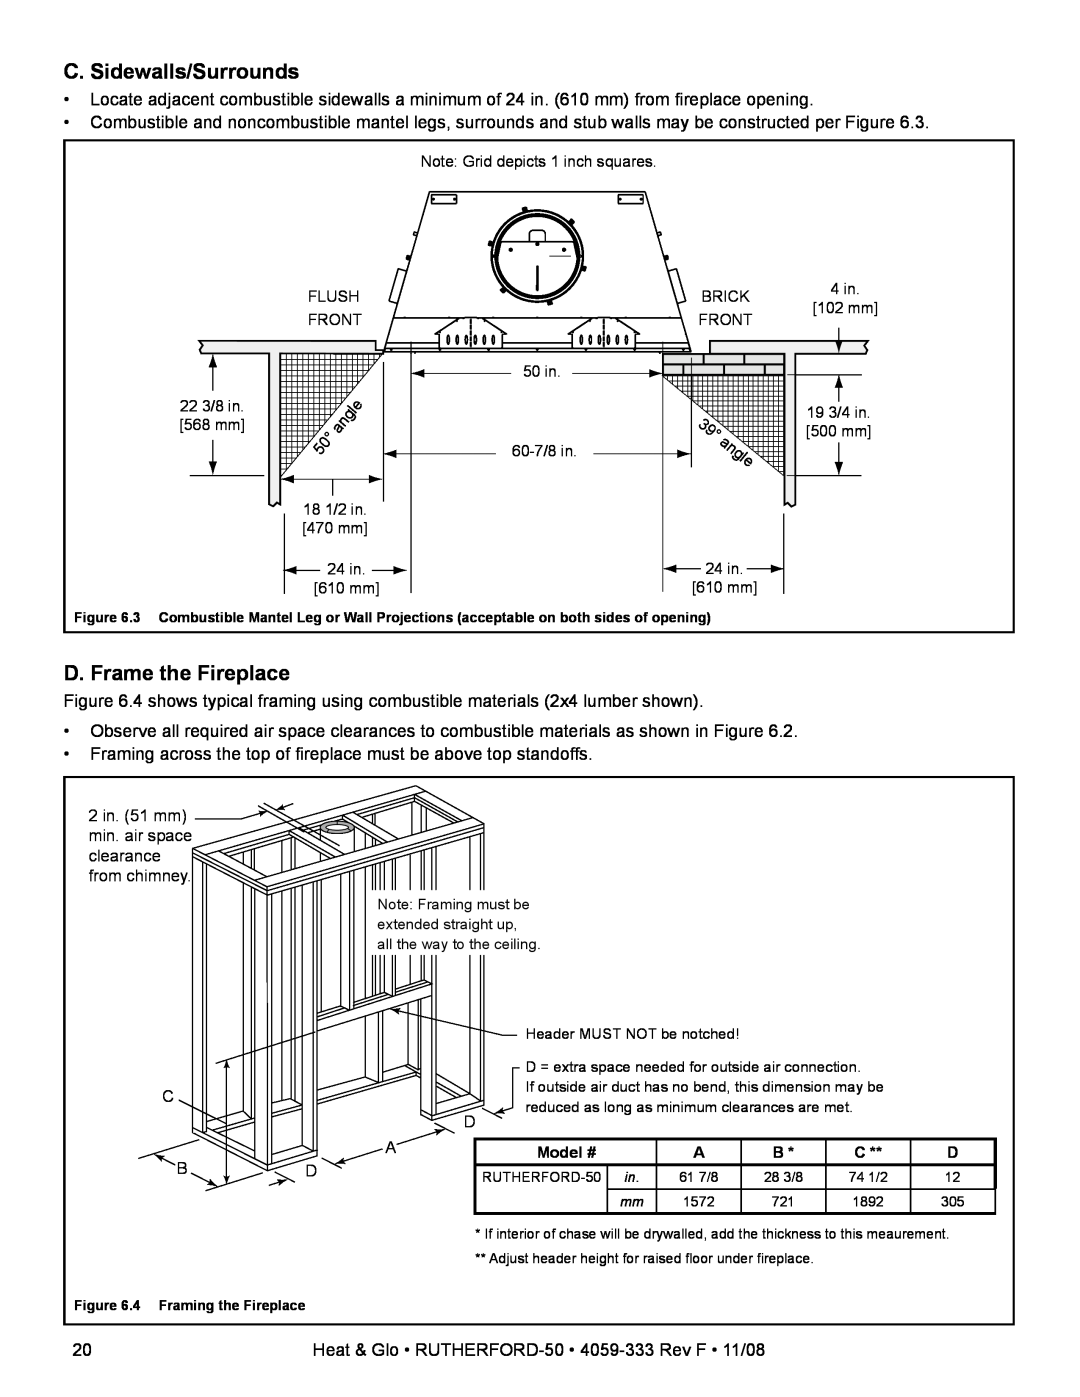 Hearth and Home Technologies RUTHERFORD-50 owner manual angle, C. Sidewalls/Surrounds, D. Frame the Fireplace 